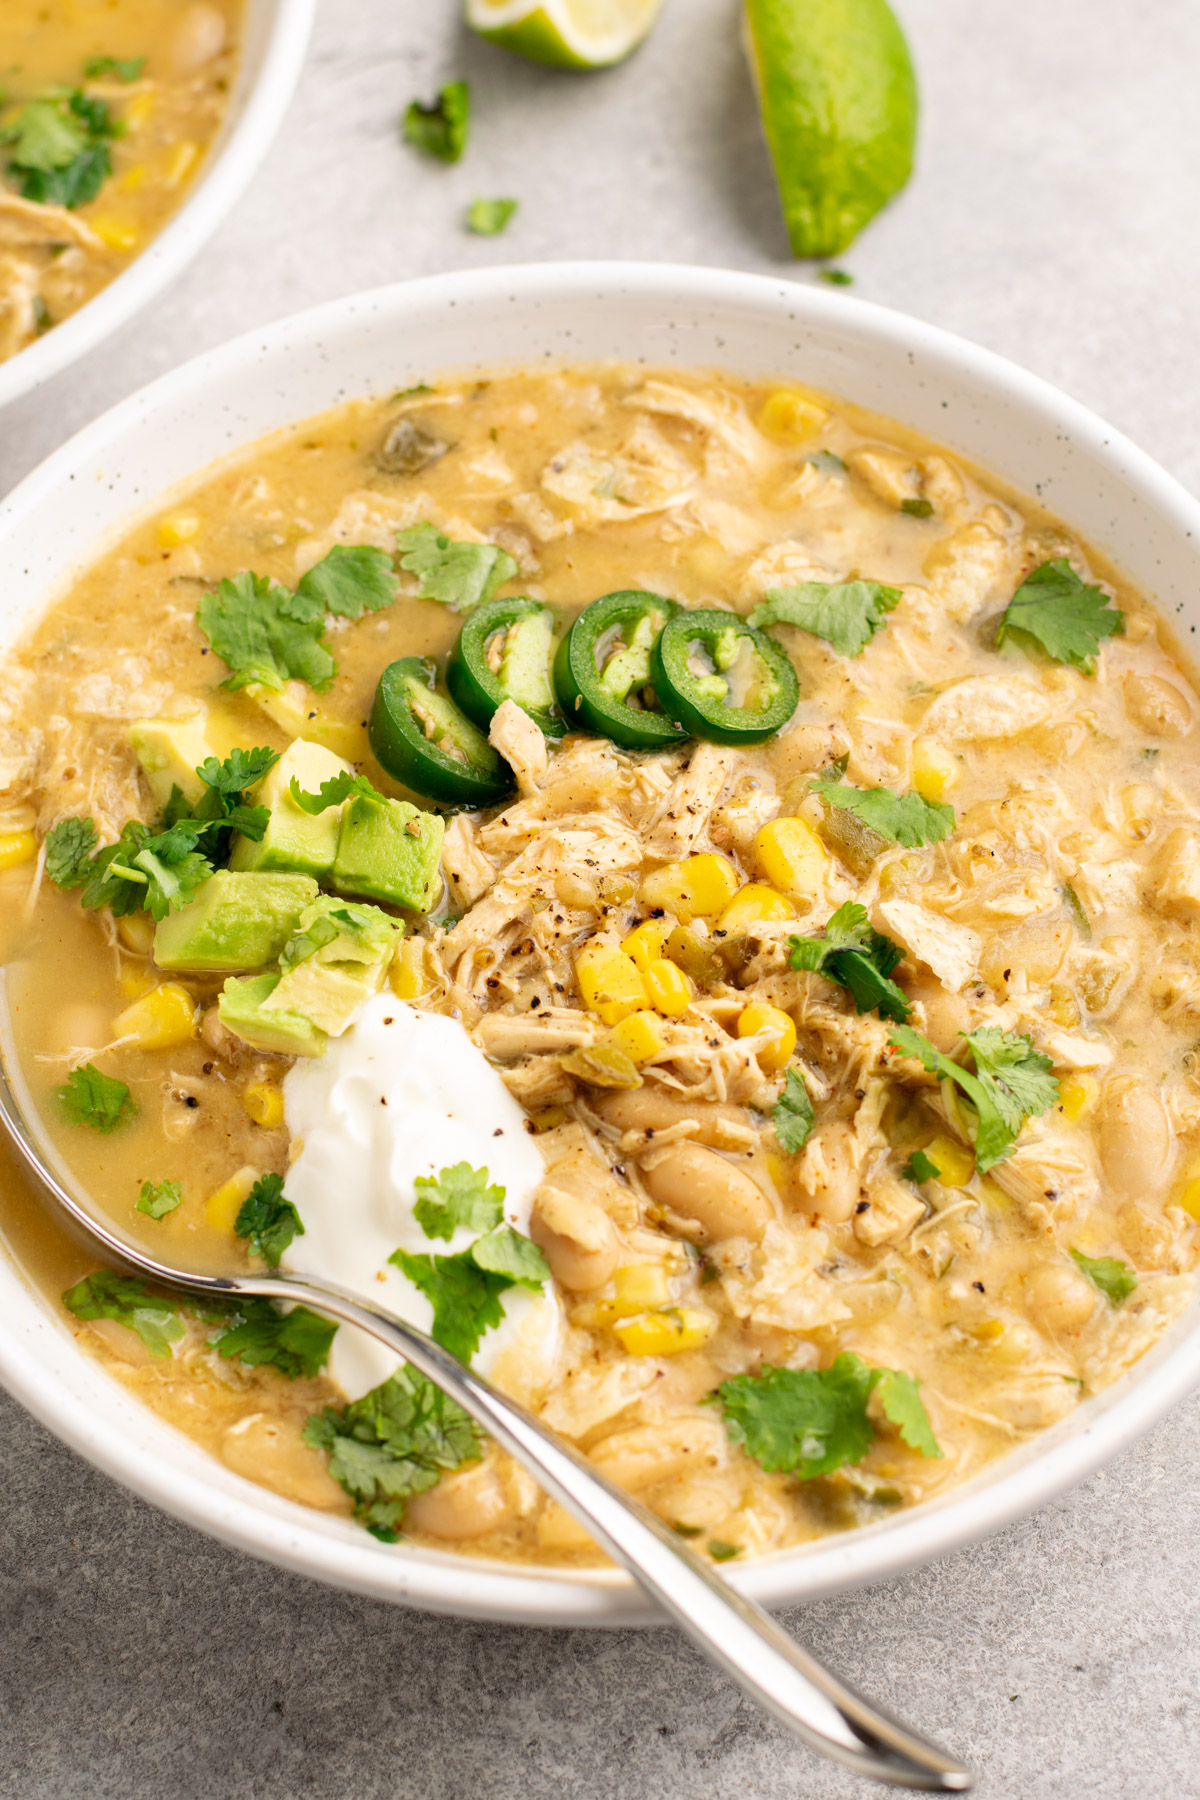 white chicken chili in a bowl topped with sour cream, avocado, jalapeño slices, and cilantro.